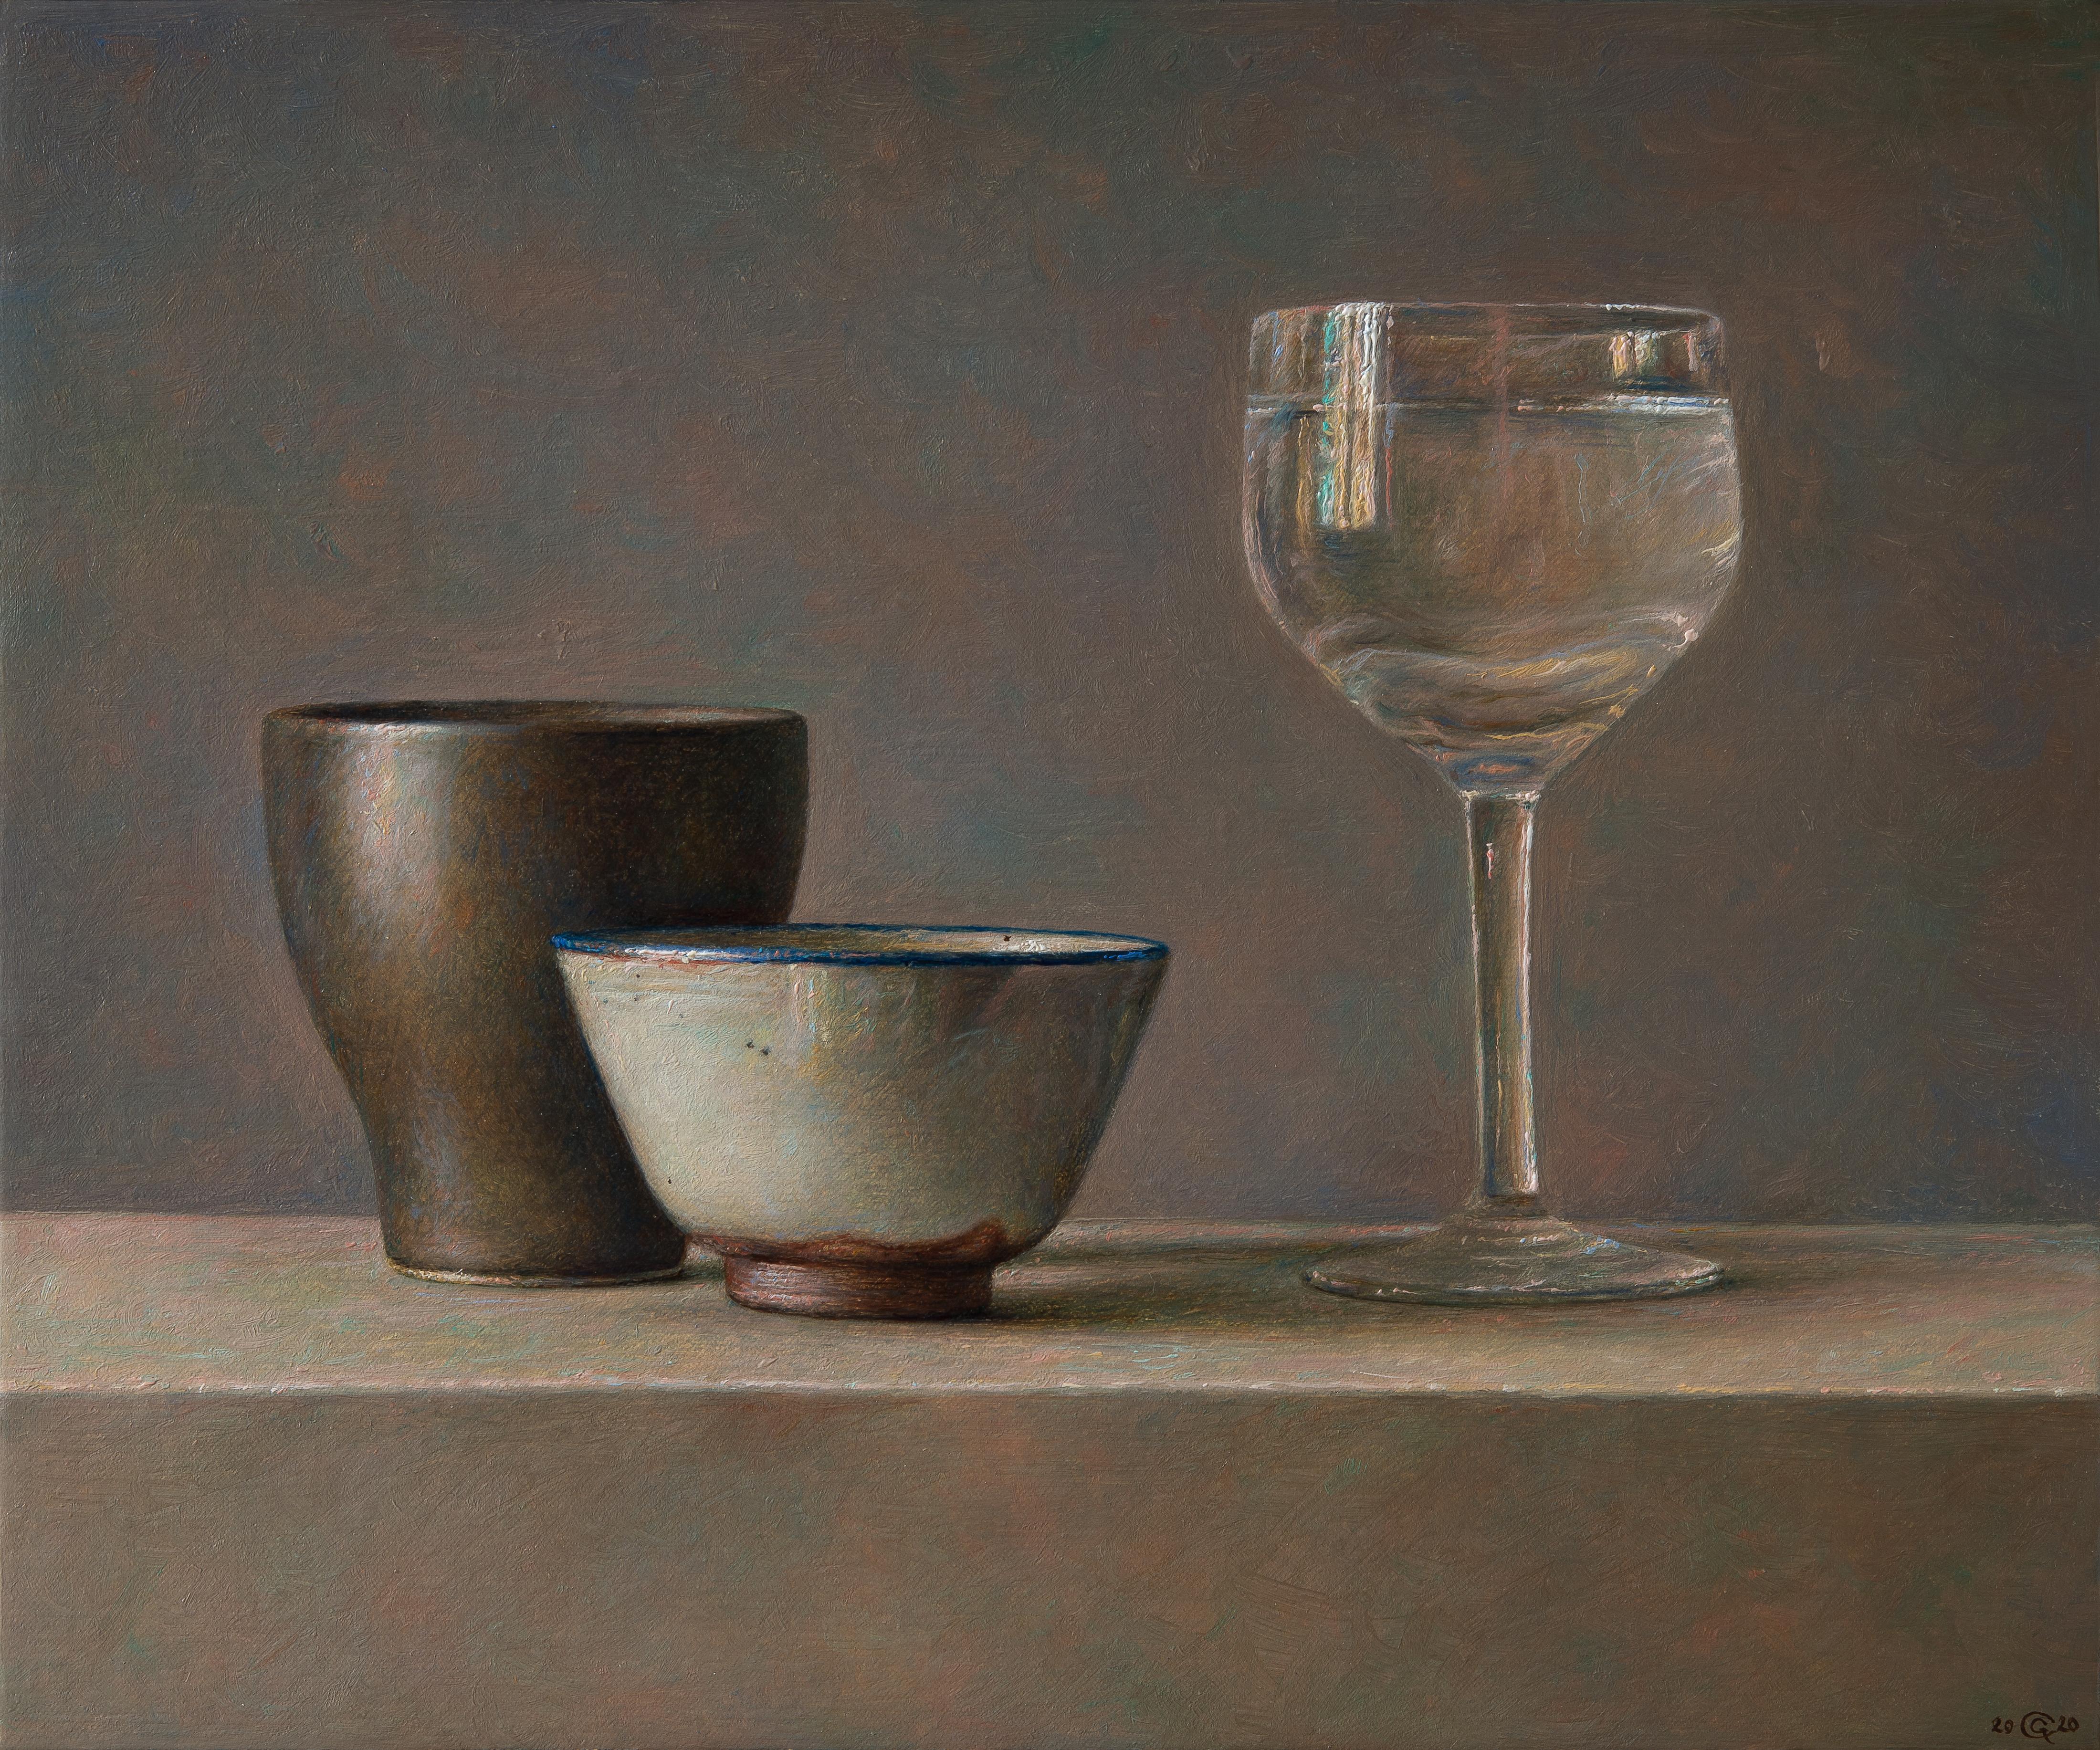 Gianluca Corona Figurative Painting - glass with water, kitchen still life painting by expert italian painter 